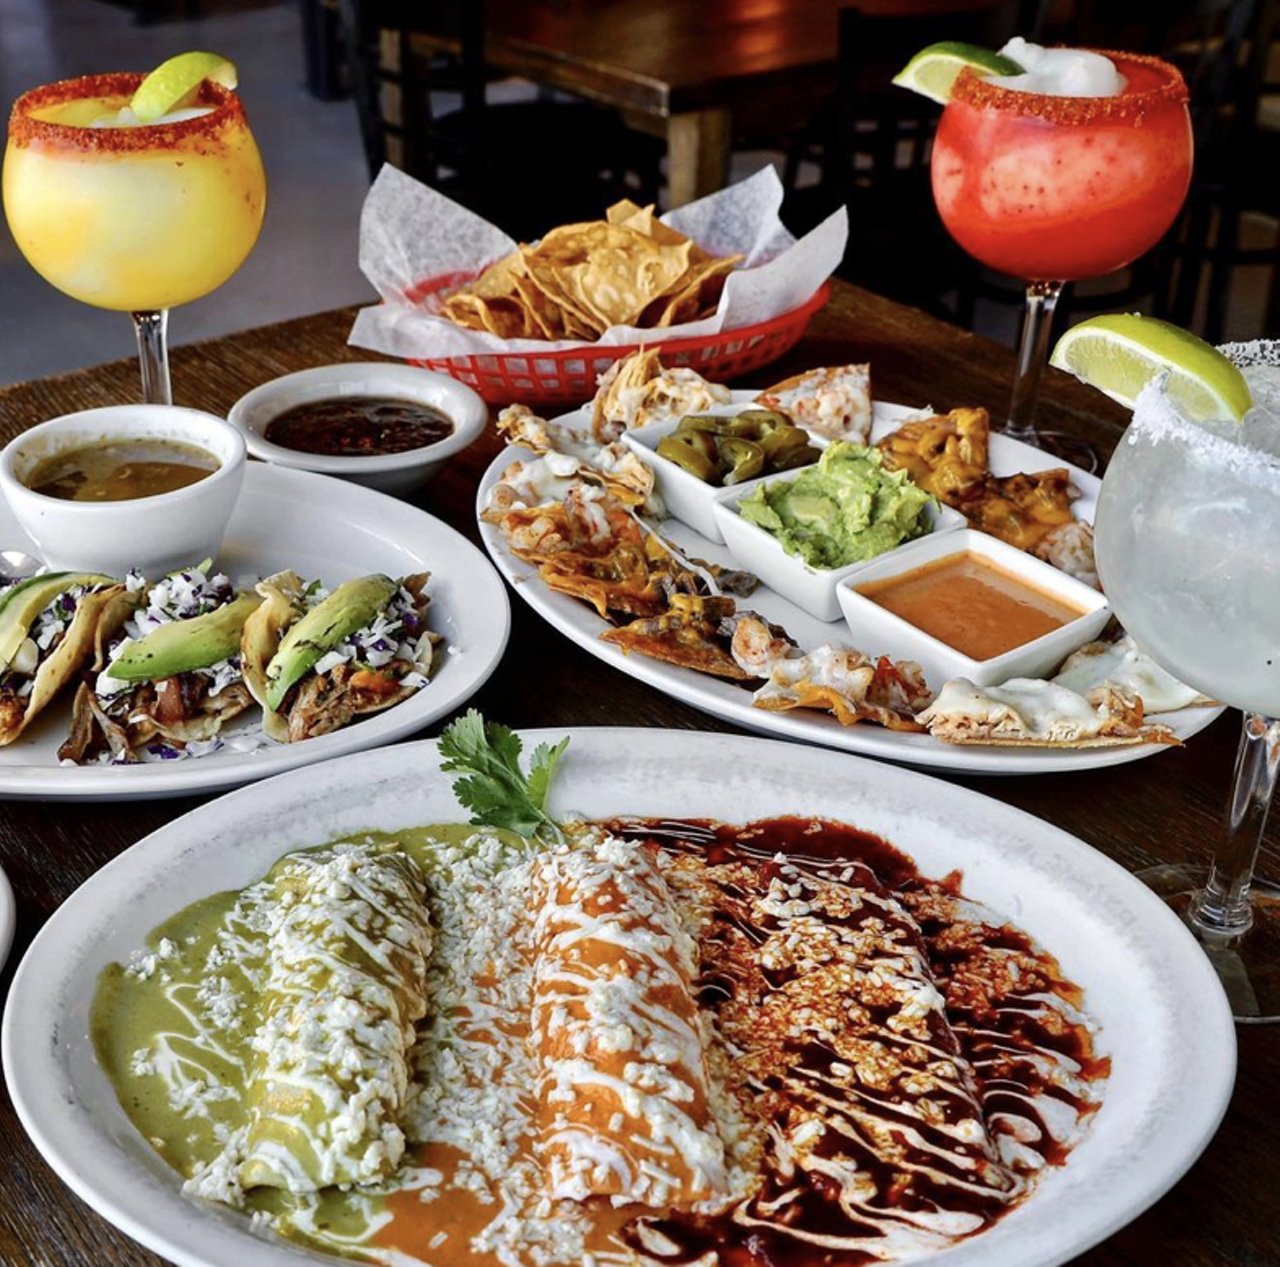 El Mirasol
938 N. Loop 1604 West, (210) 592-8576, elmirasolsa.com
Longtime Mexican spot El Mirasol closed its original Blanco location in October of 2020, but moved into a renovated space in the Stone Oak area featuring a sprawling patio and their signature margs.
Photo via Instagram / s.a.foodie